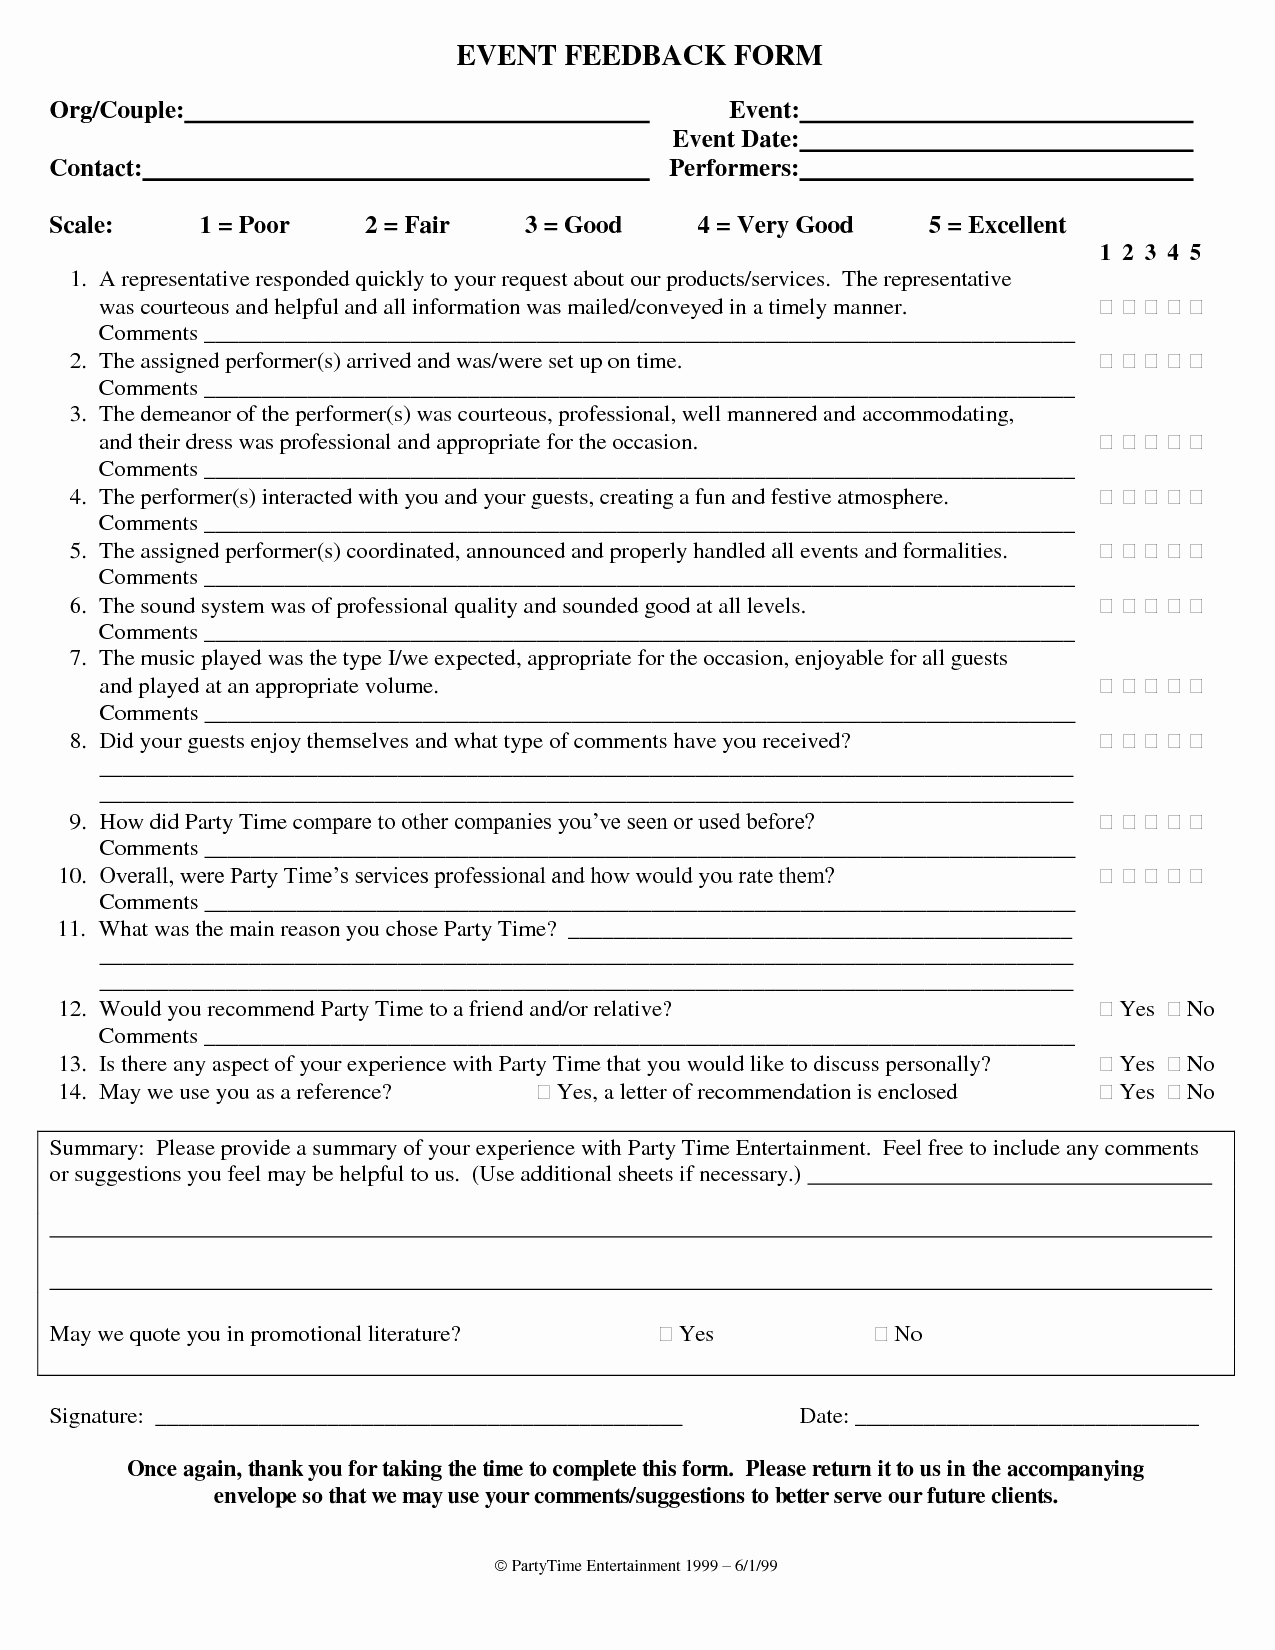 Event Feedback form Template Beautiful Best S Of event Feedback form event Feedback form